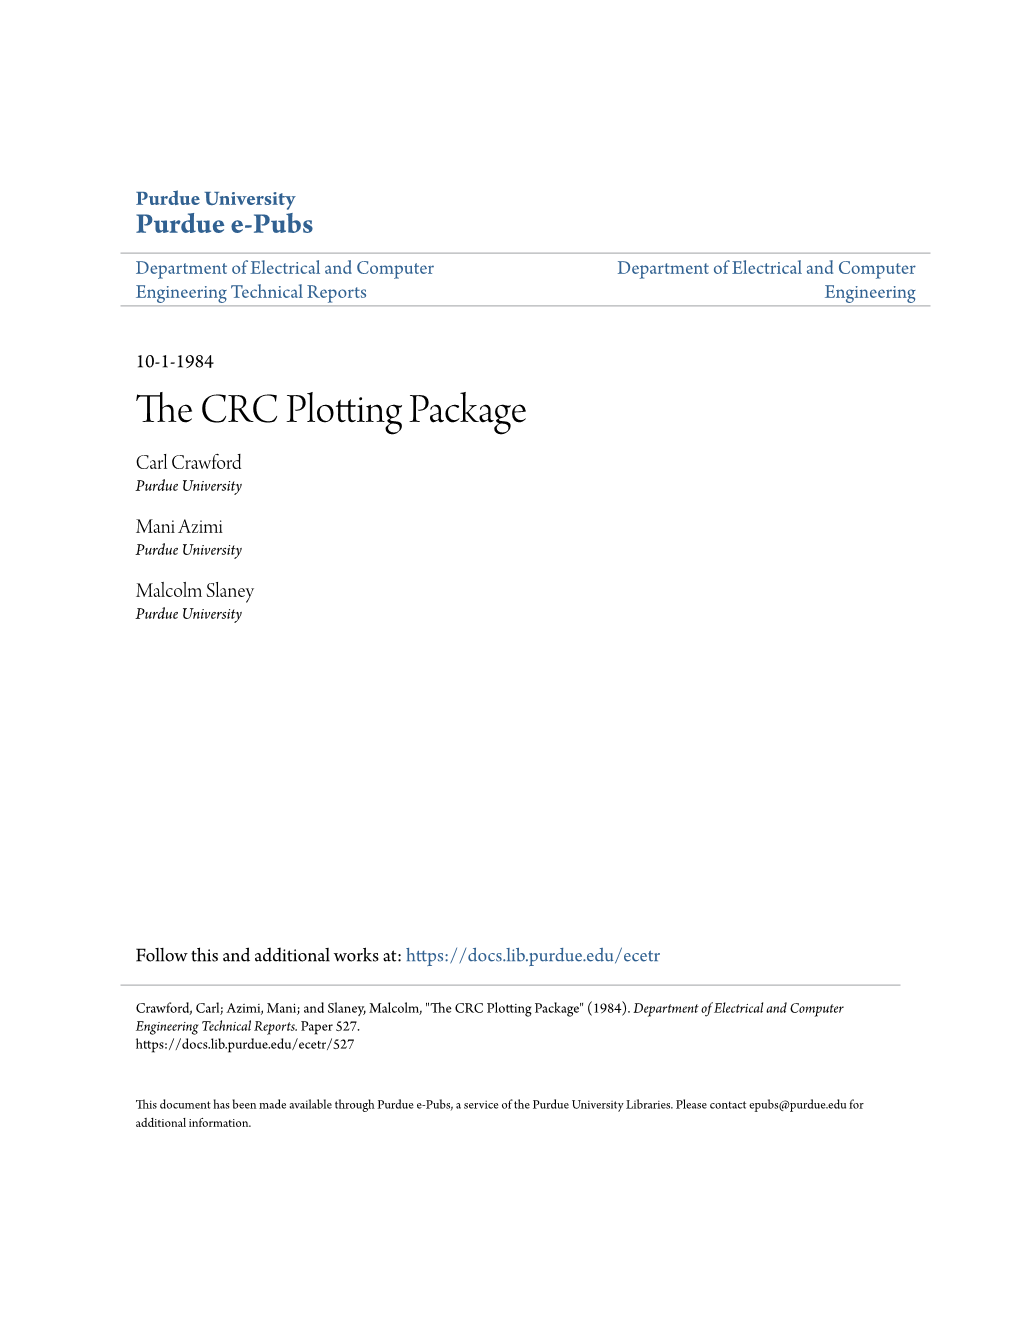 The CRC Plotting Package Is a Device Independent Graphics System